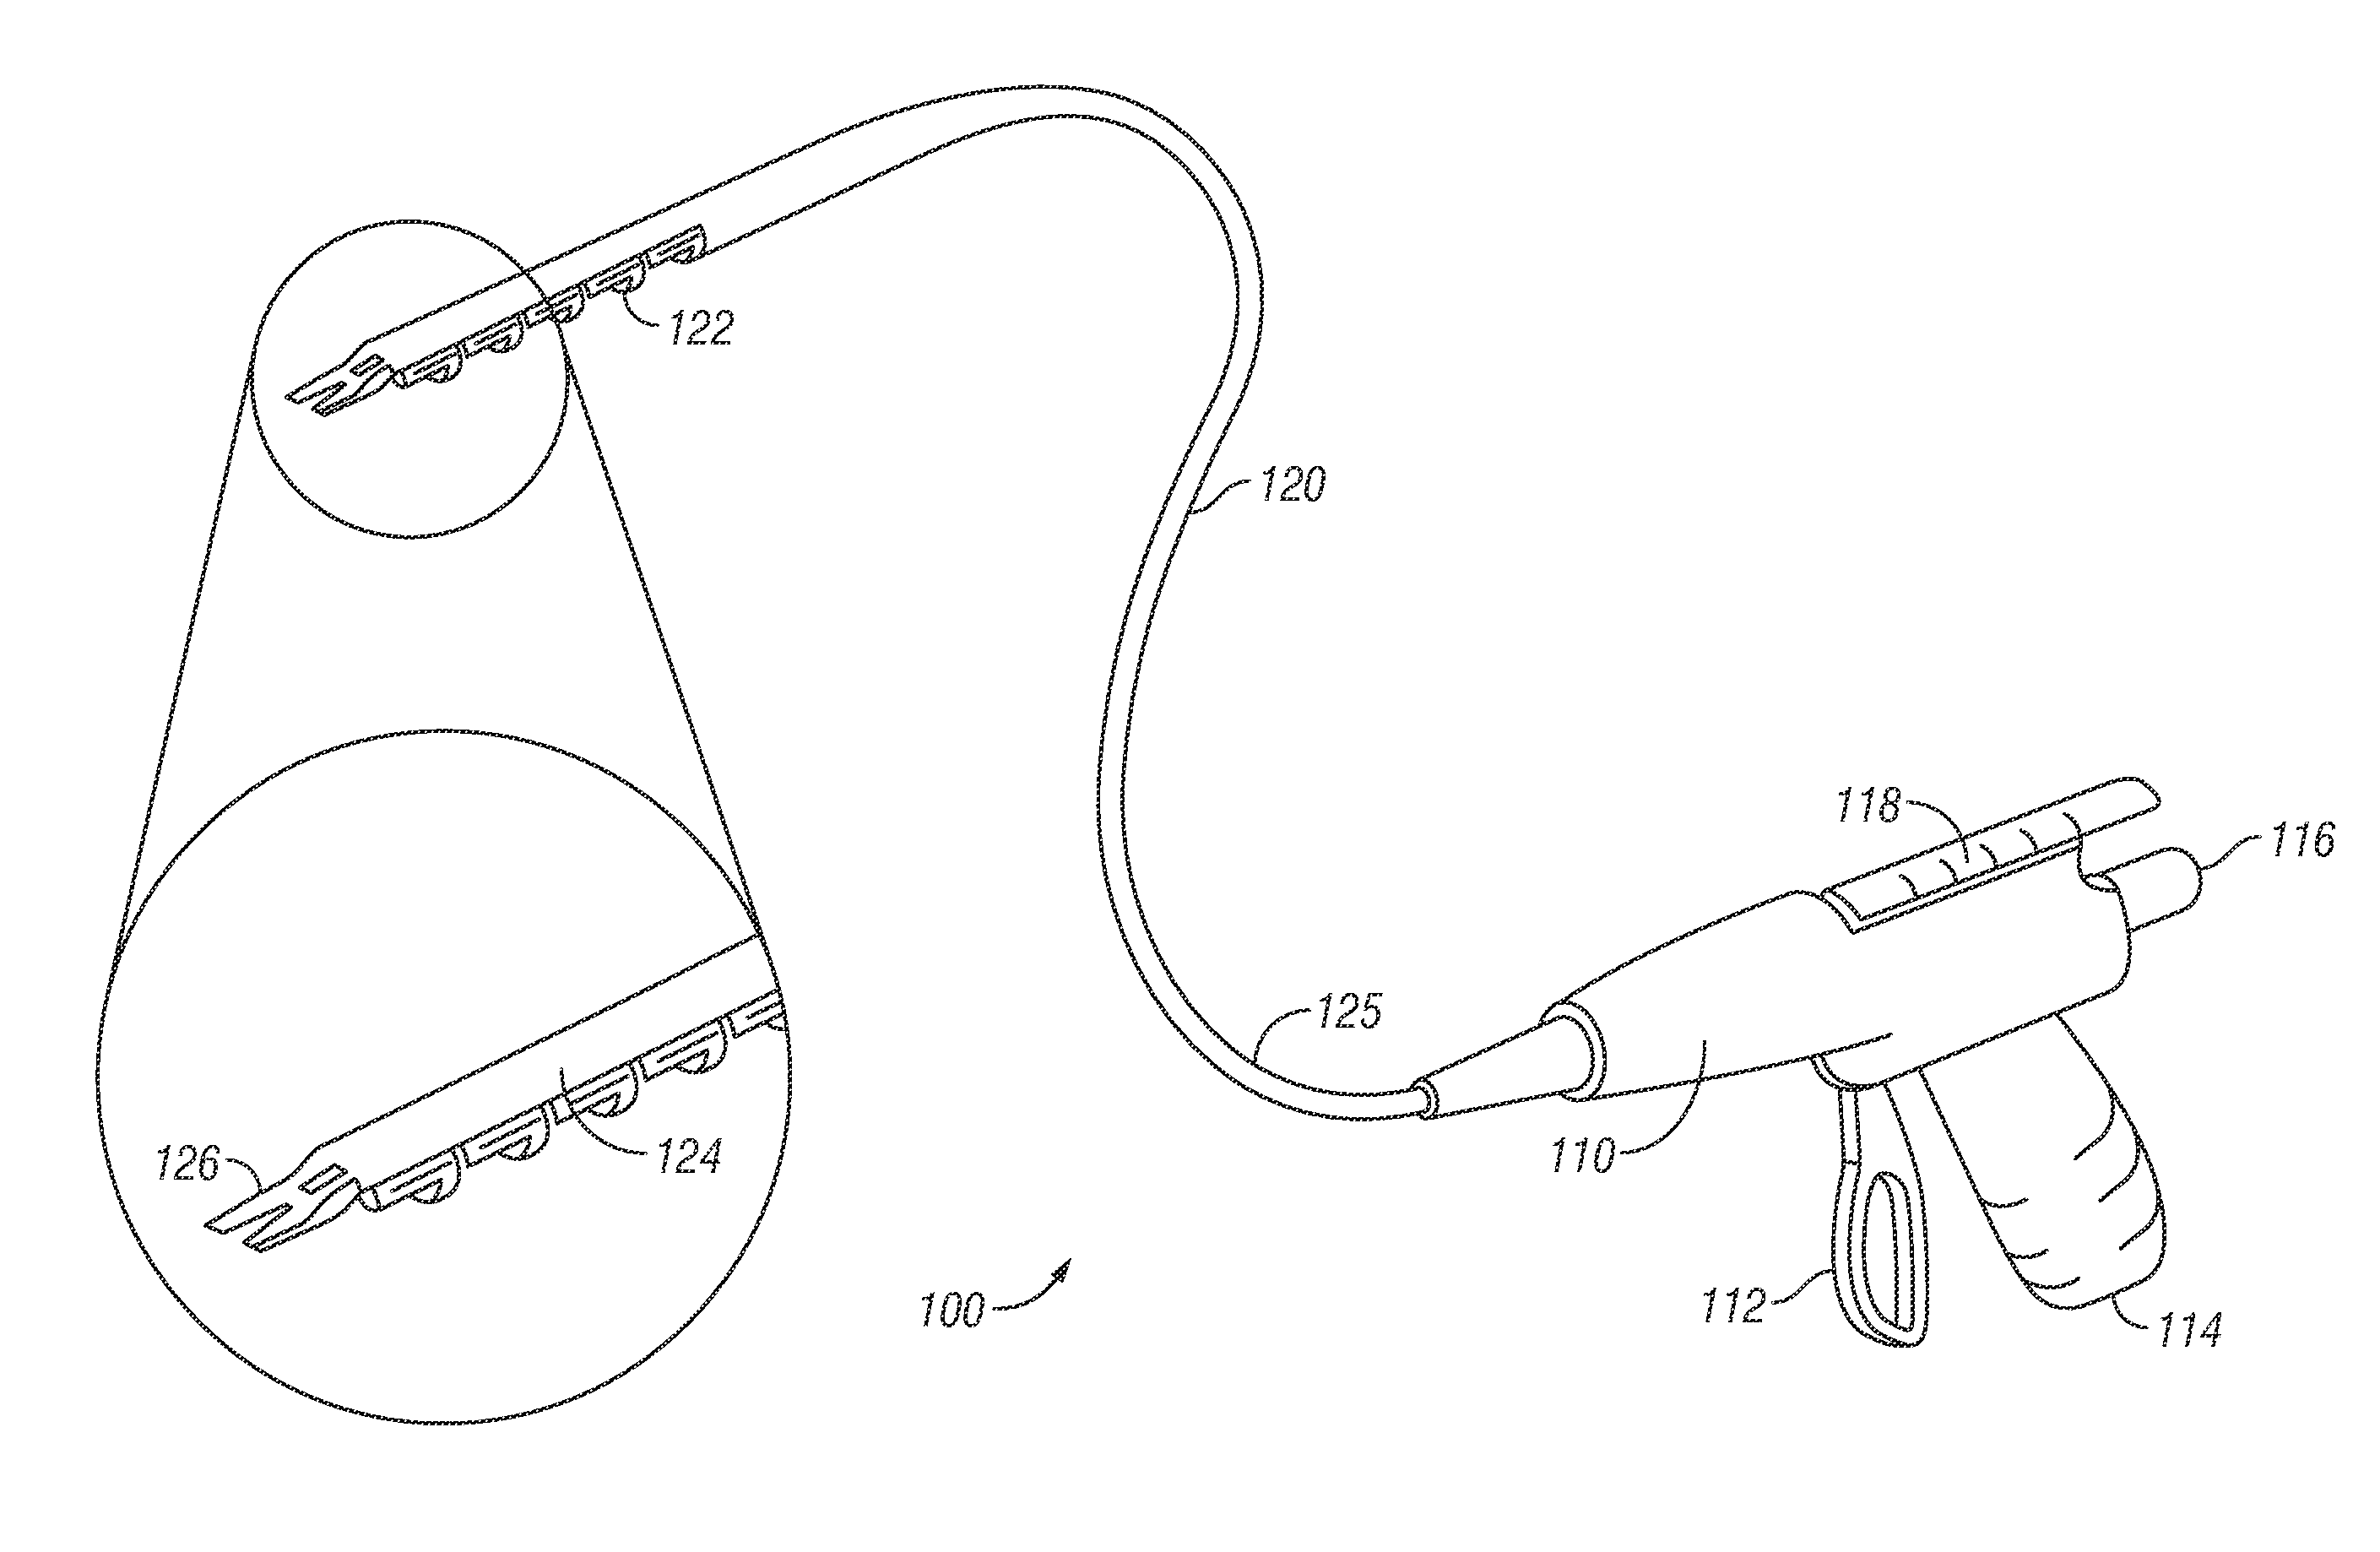 Multiple clip endoscopic tissue clipping system and device